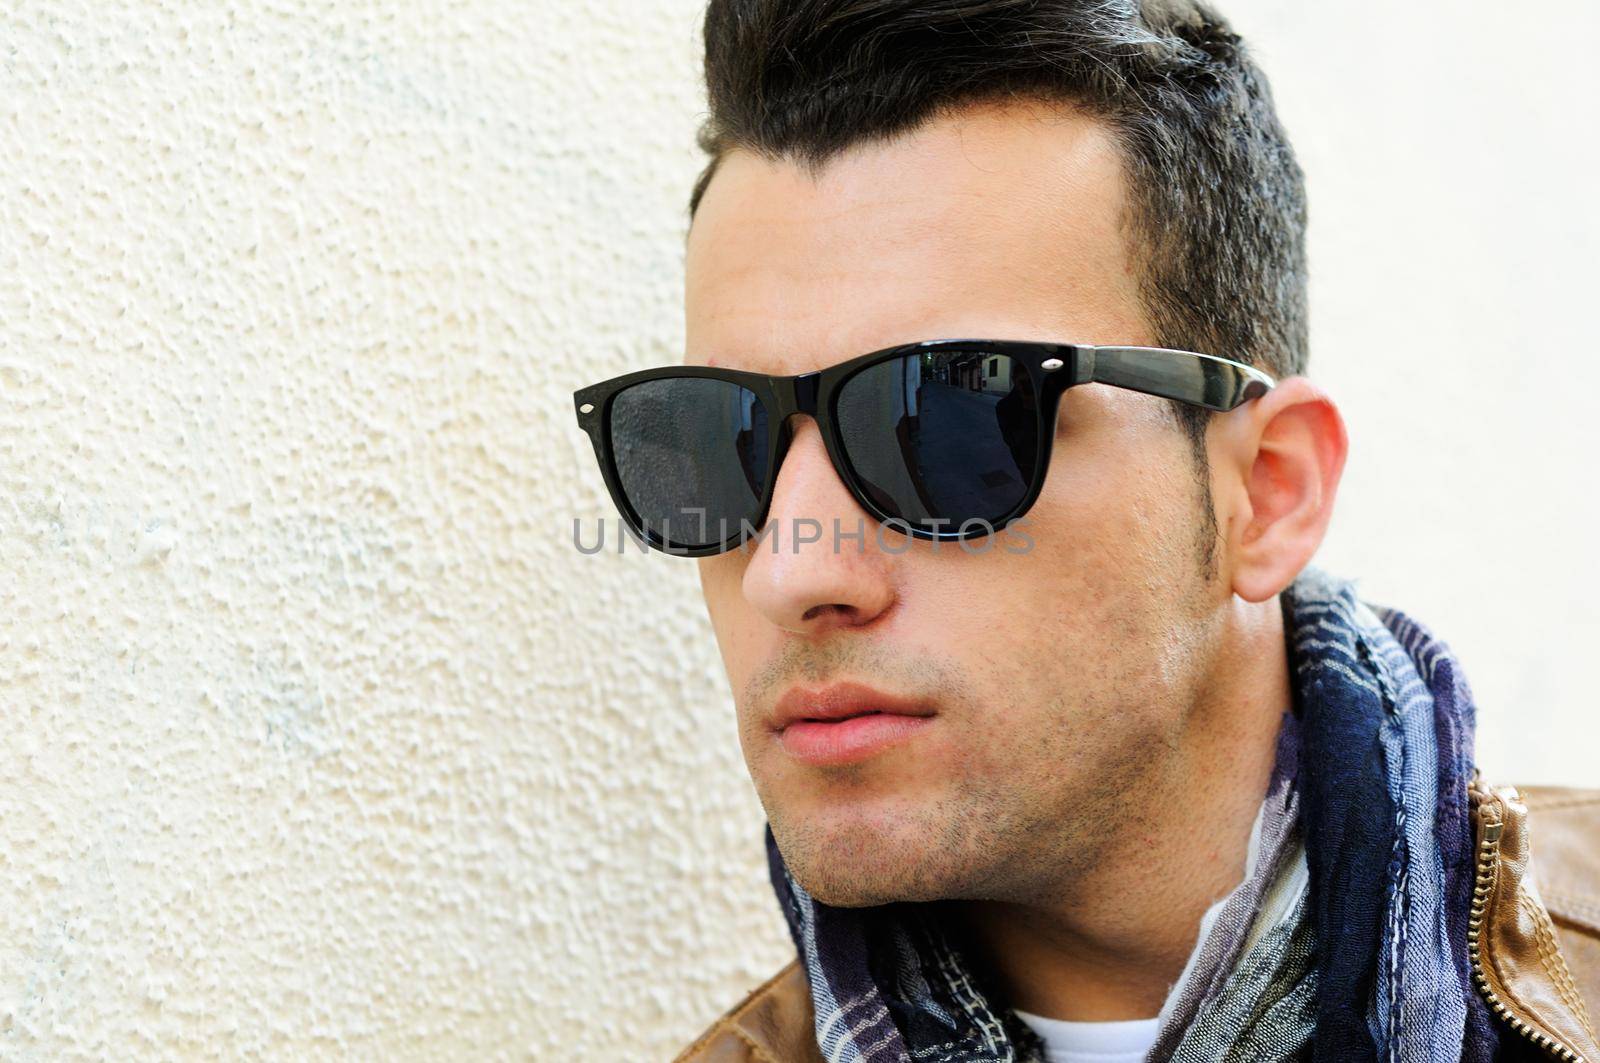 Portrait of a young handsome man, model of fashion, wearing tinted sunglasses in urban background